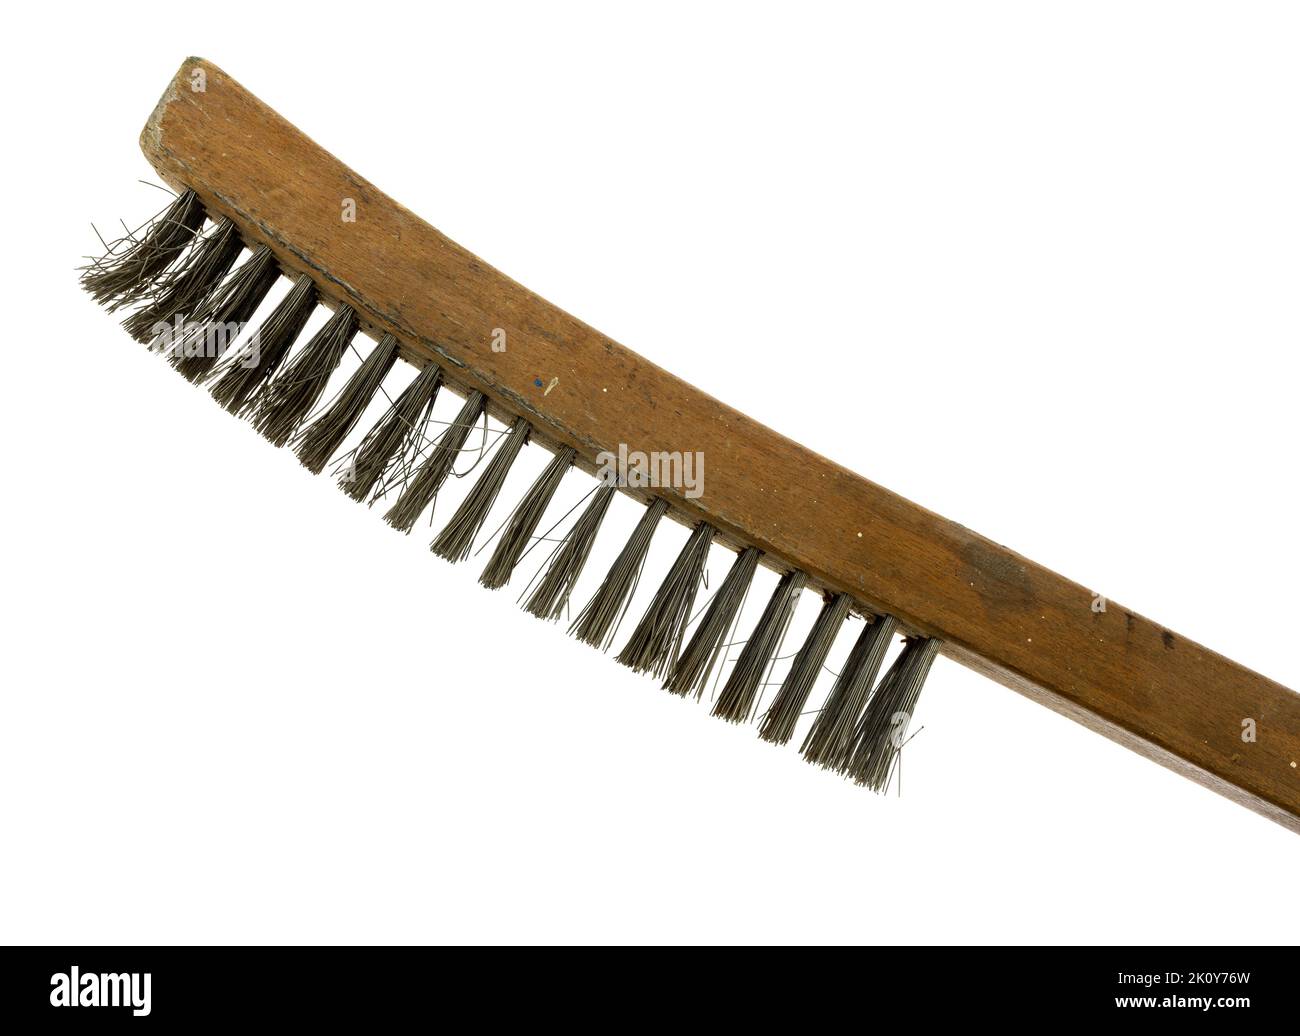 Old wood handle wire brush with bent wires and stained handle on a white background. Stock Photo